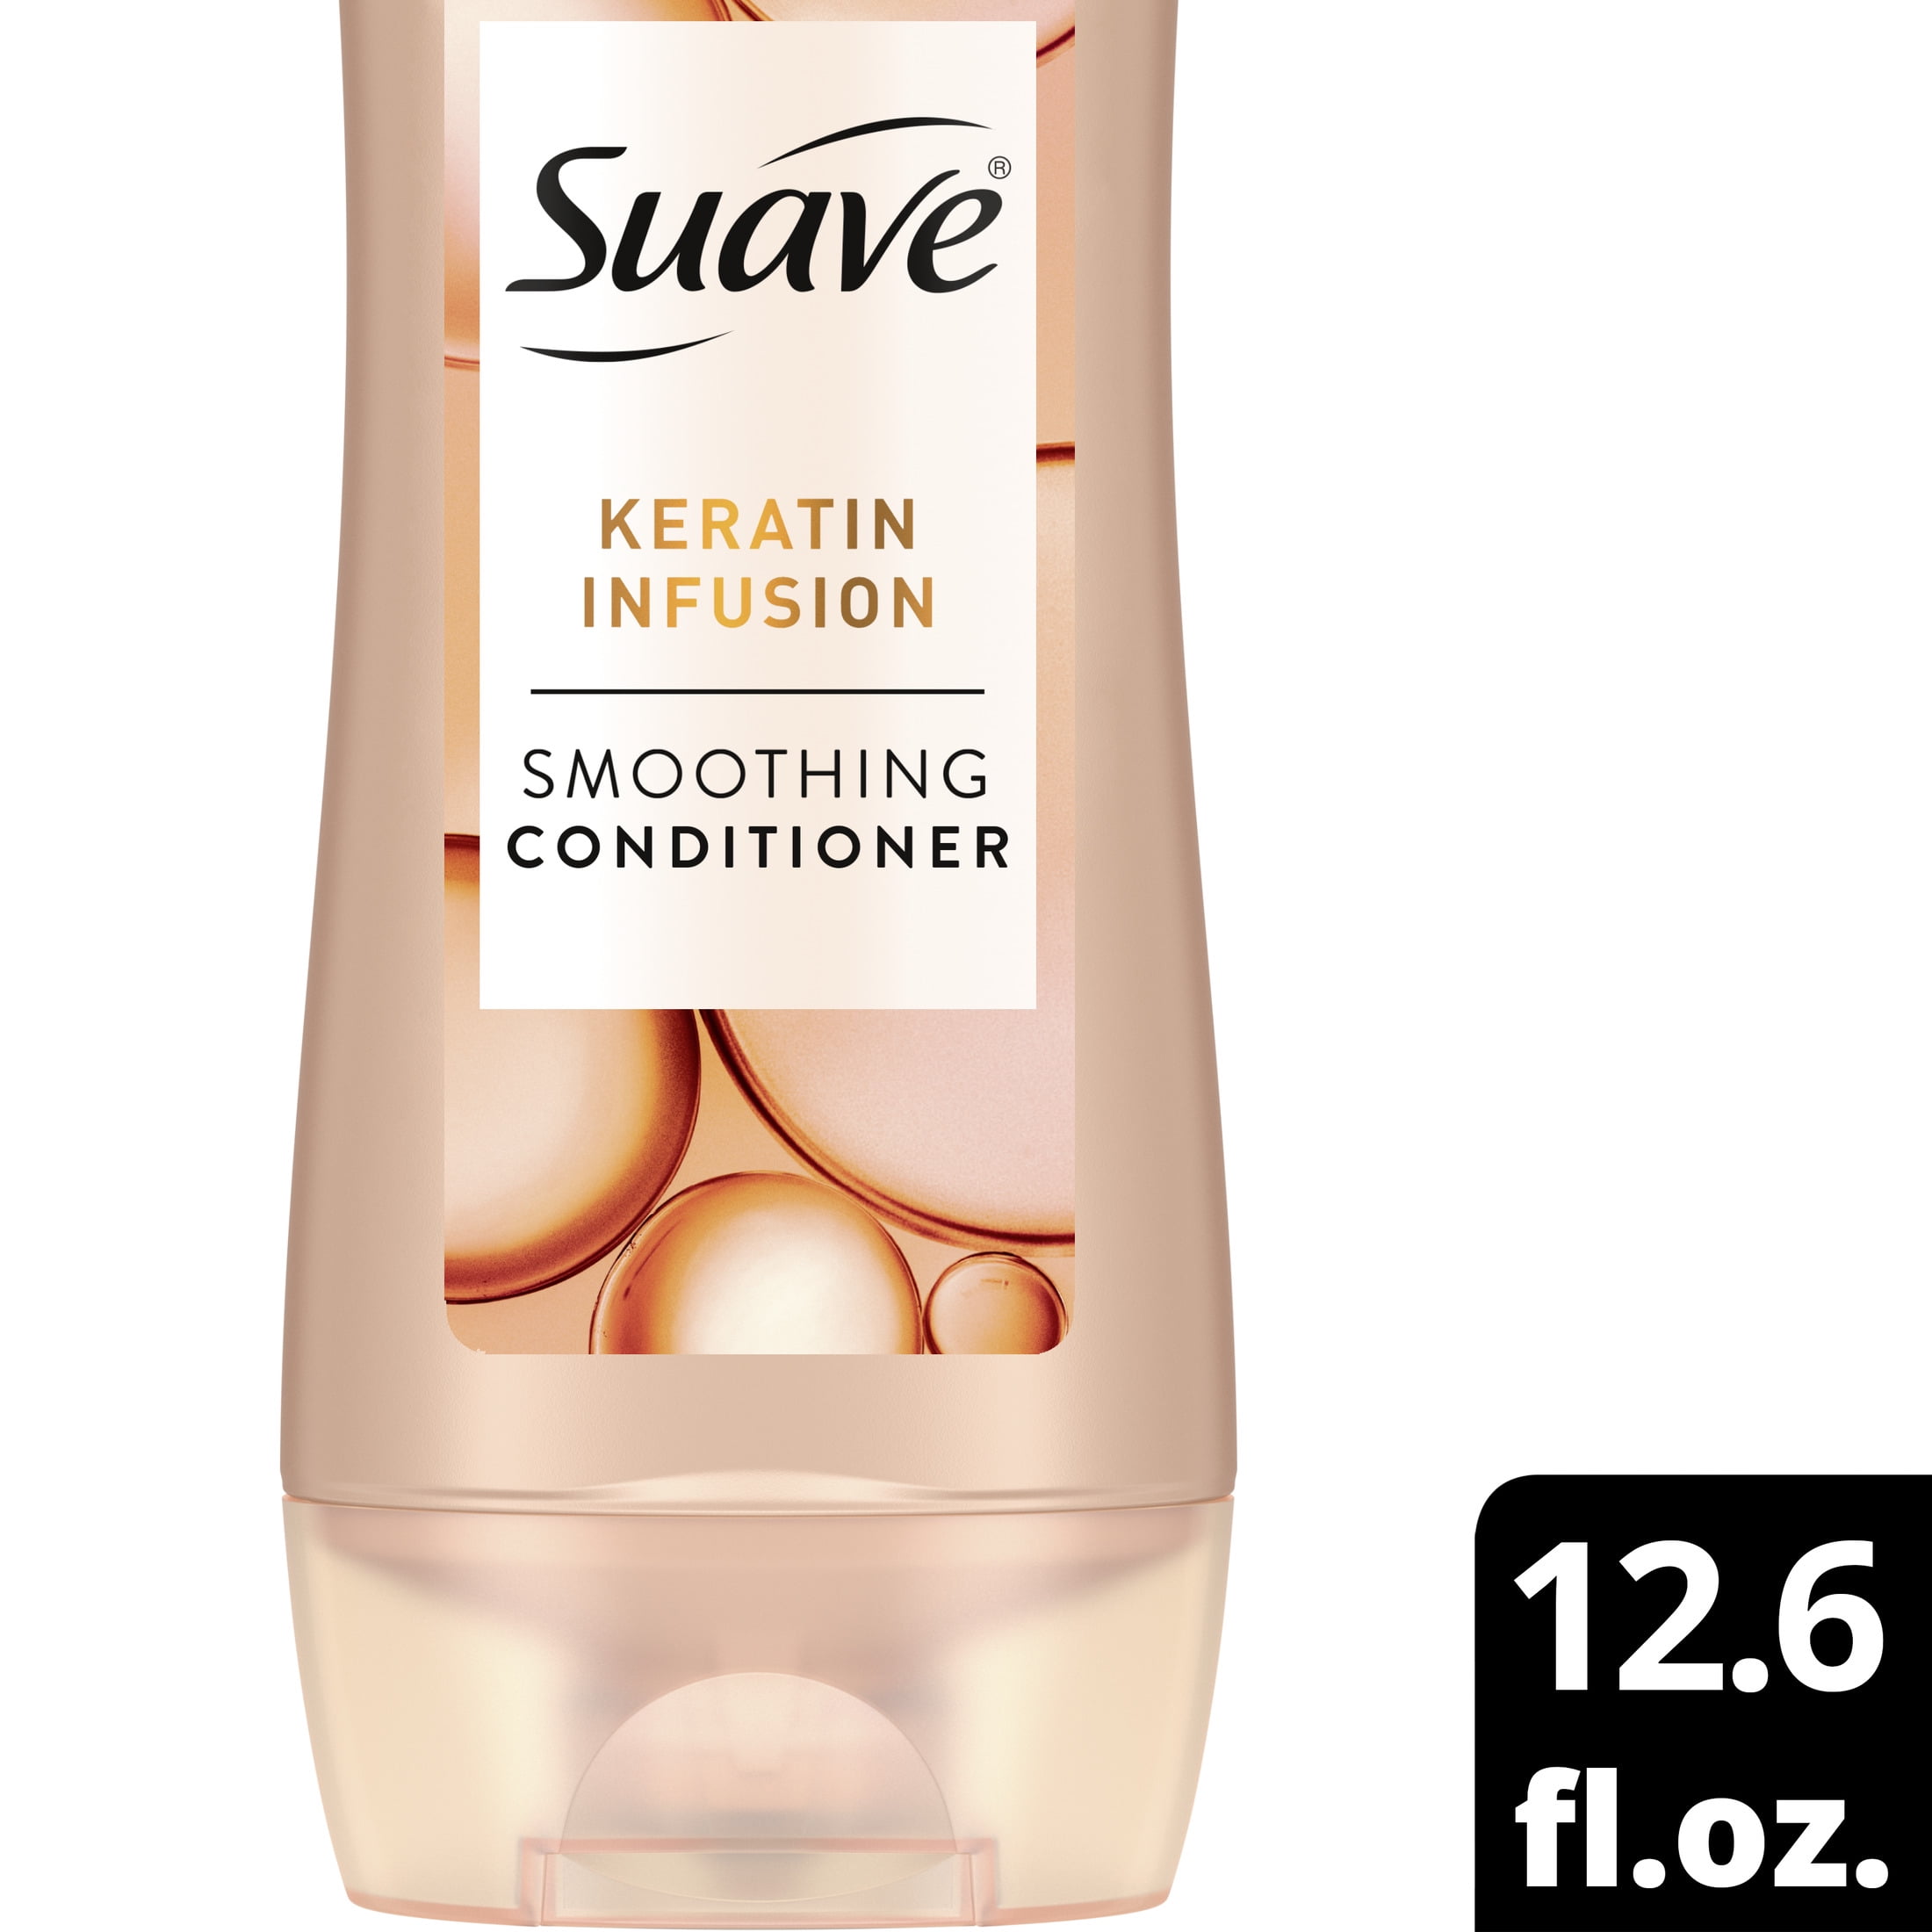 Suave Keratin Infusion Smoothing Conditioner Frizzy Hair 12.6 fl oz